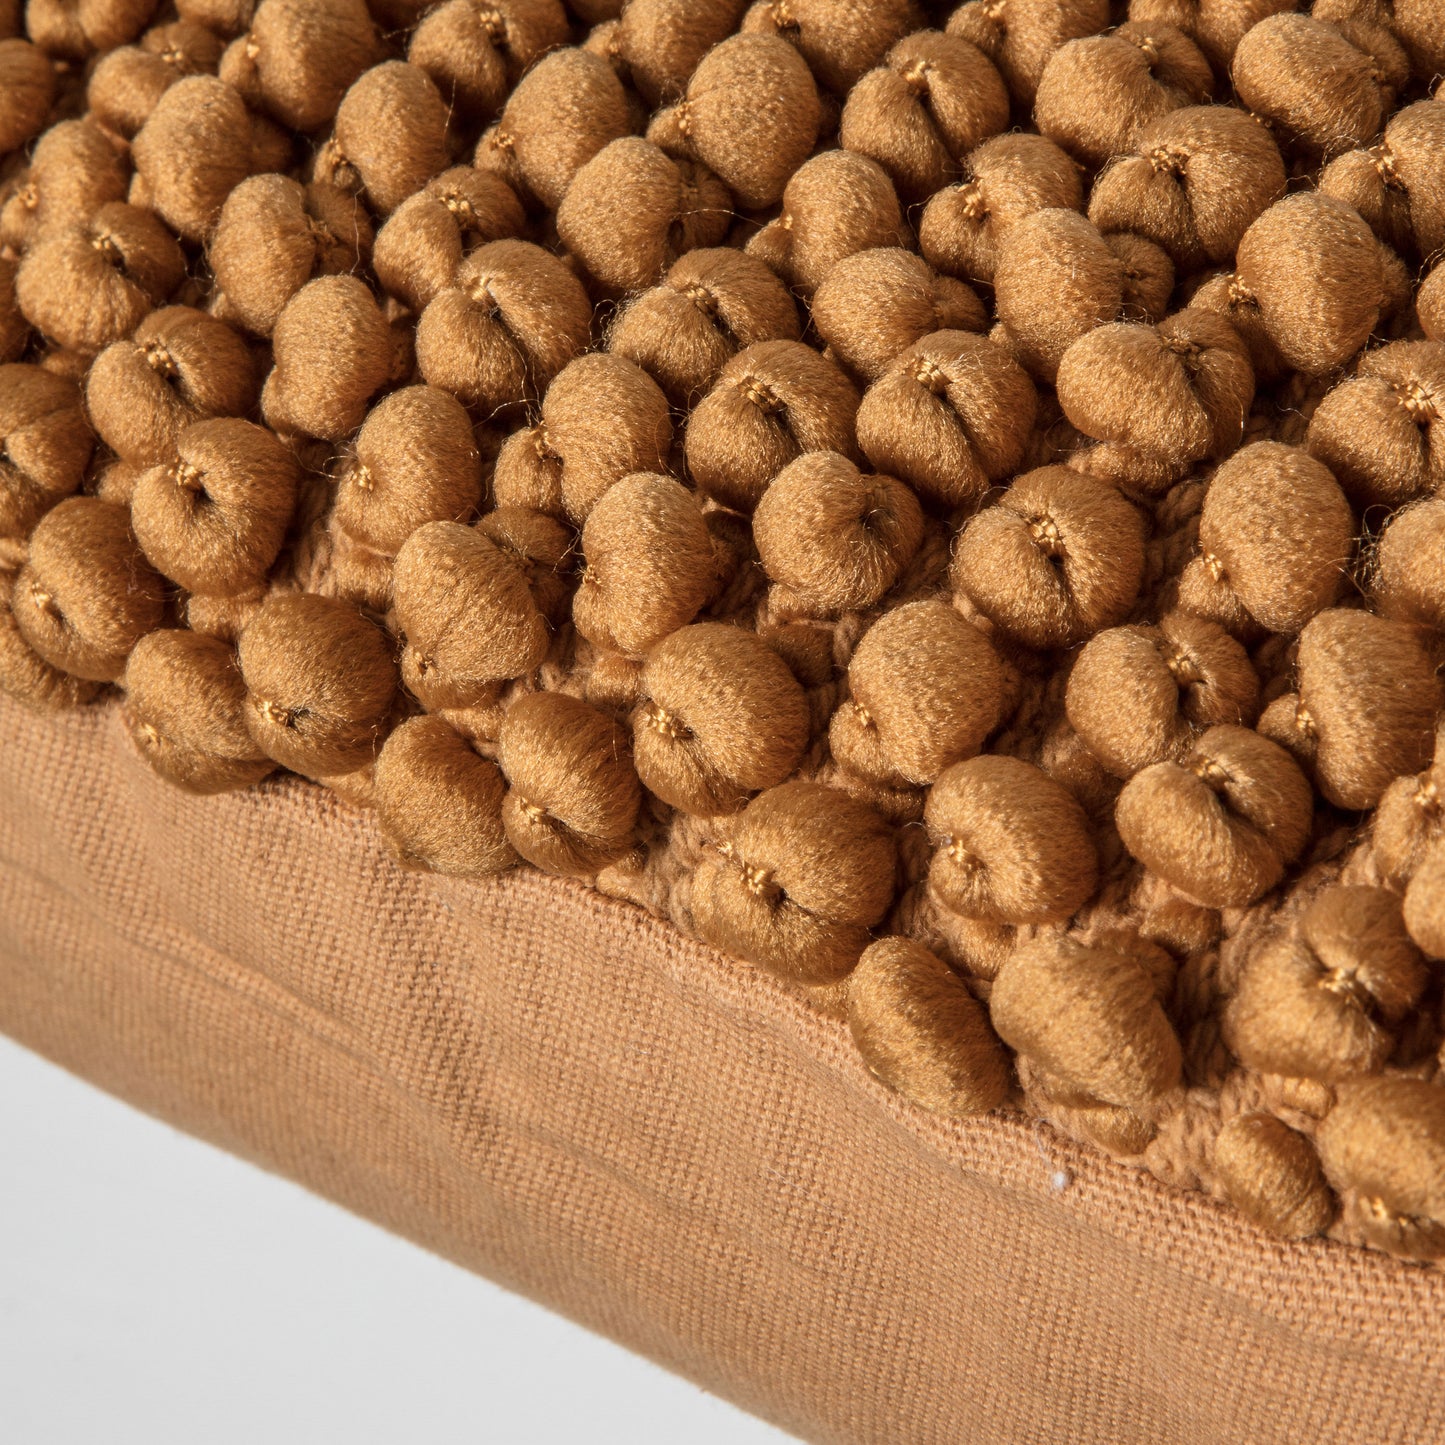 A close up of a pile of brown Pino Cushion Tan 450x450mm pom poms for home decor from Kikiathome.co.uk.